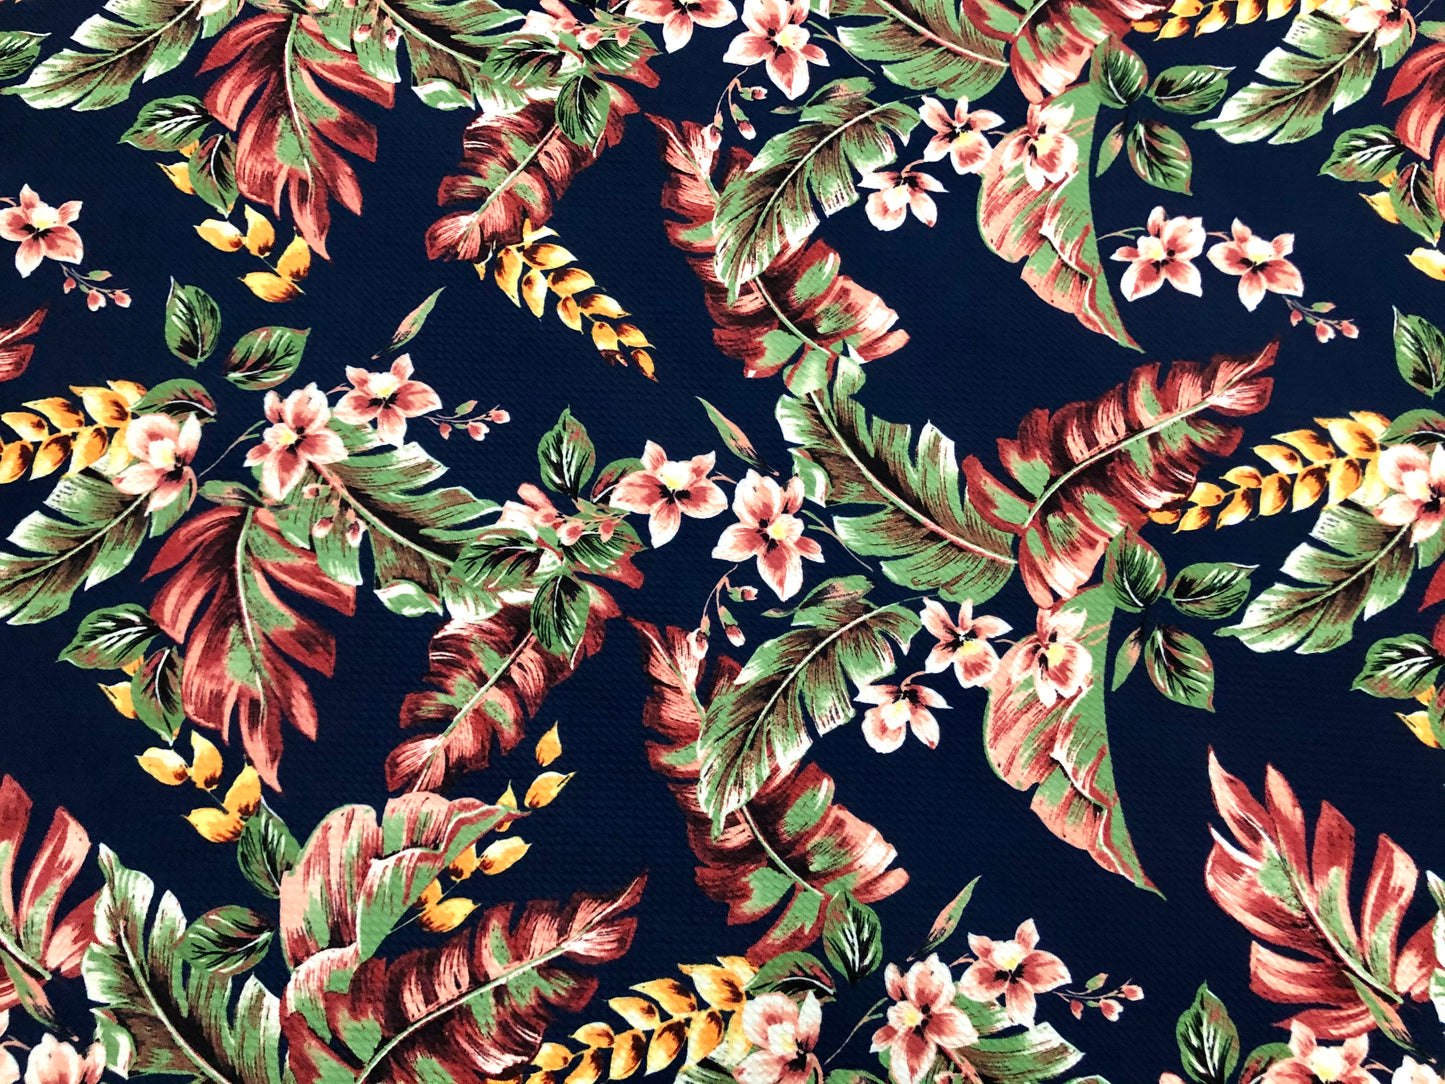 Bullet Knit Printed Fabric-Navy Blue Green Peach Palms-BPR233-Sold by the Yard